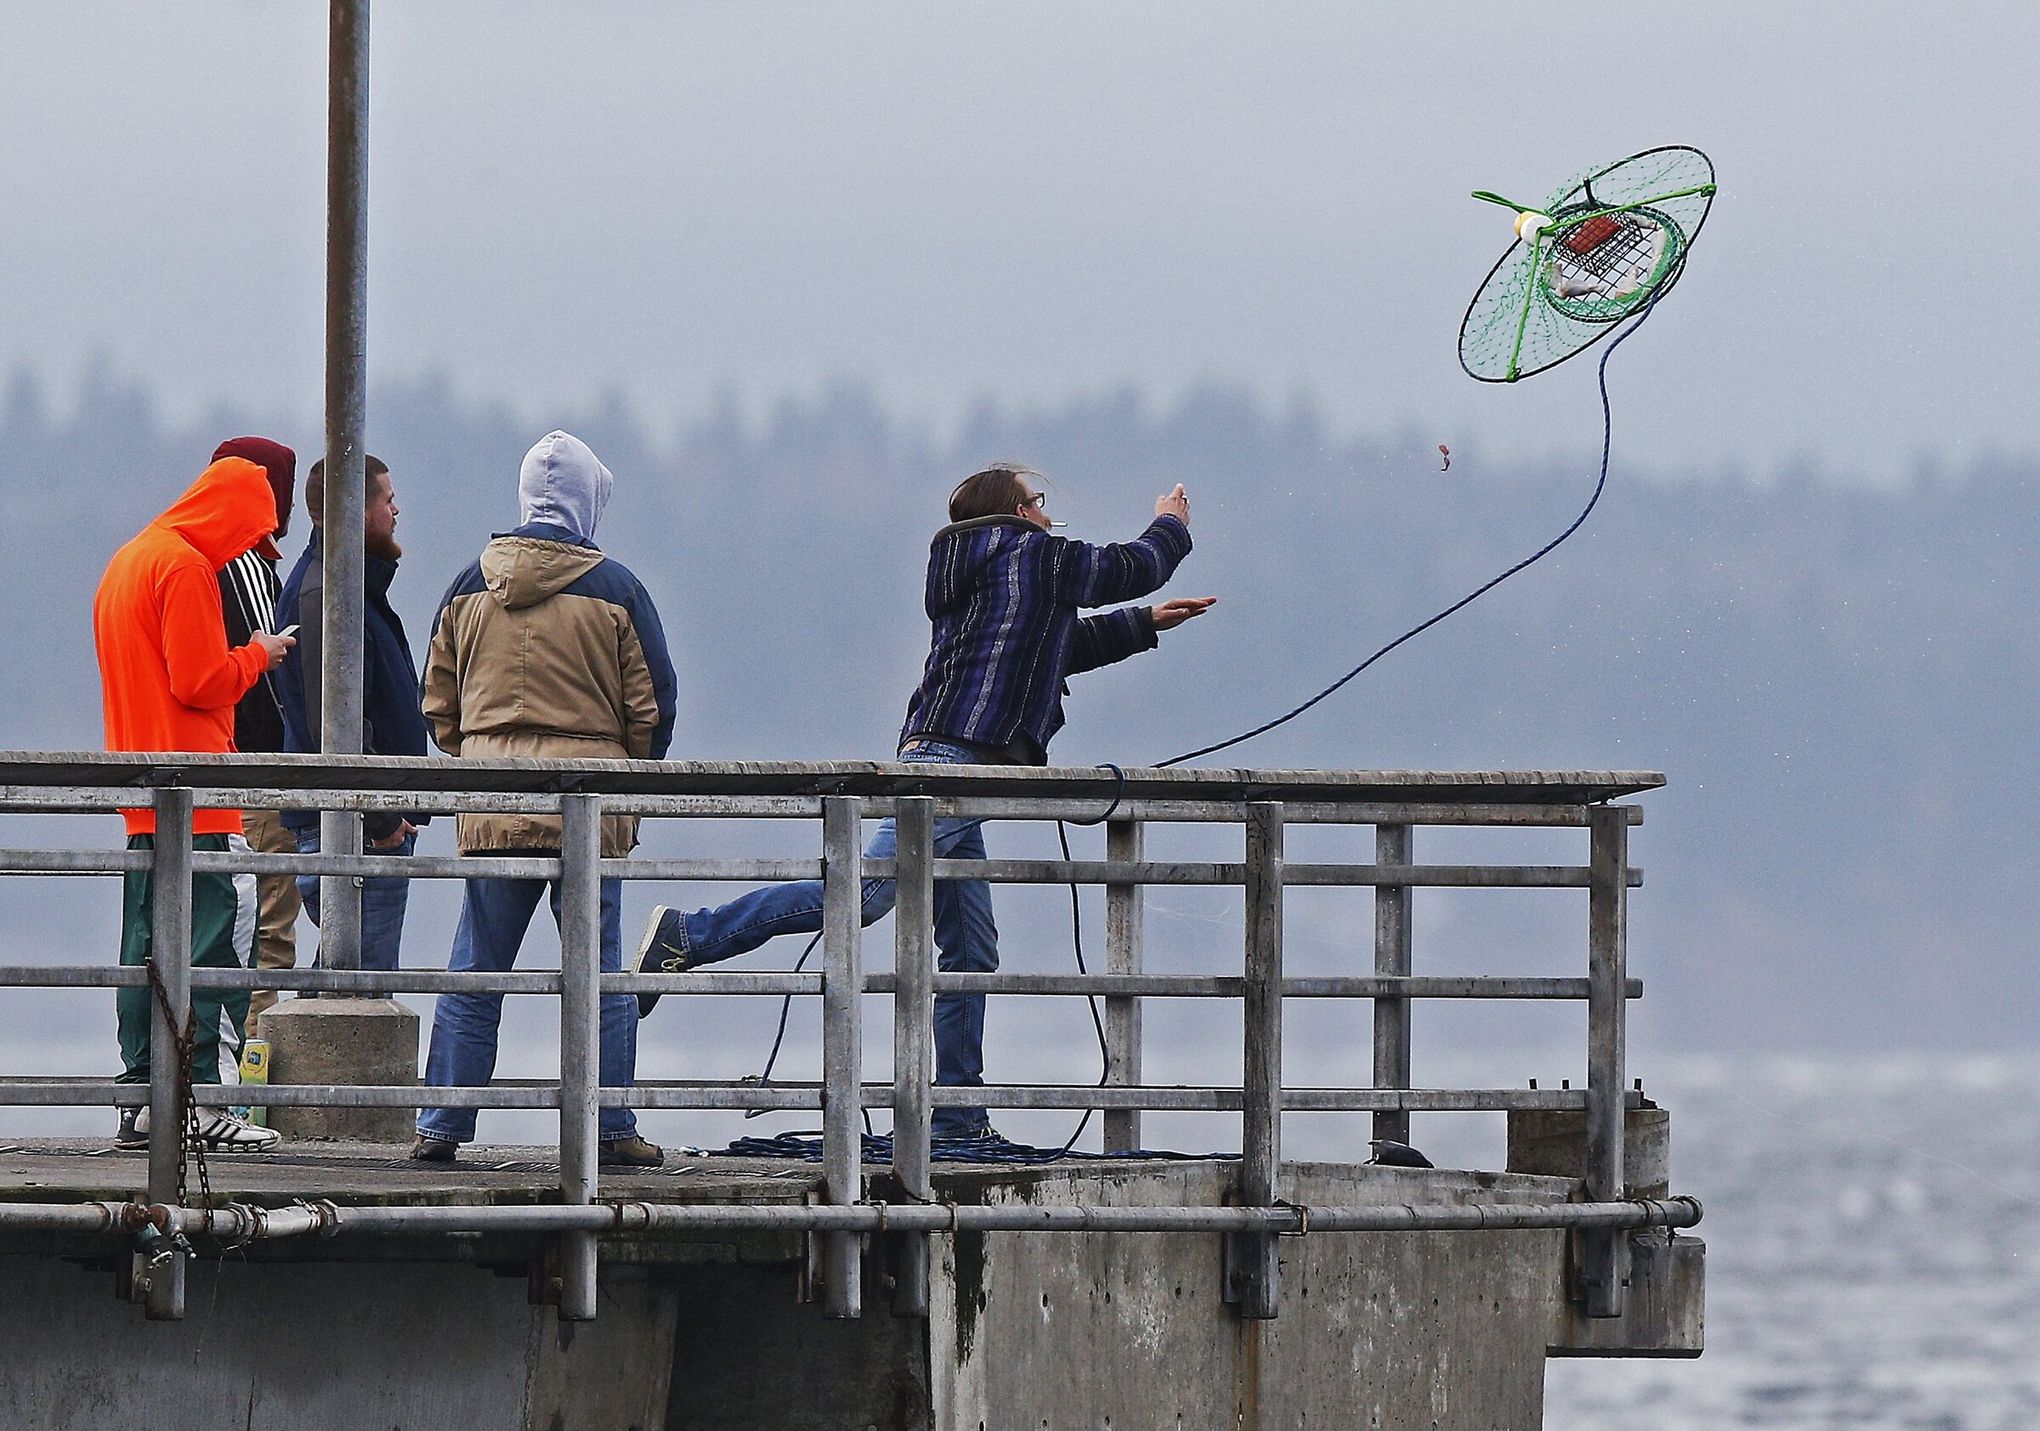 Crabbing season opens in waters off Seattle, Tacoma